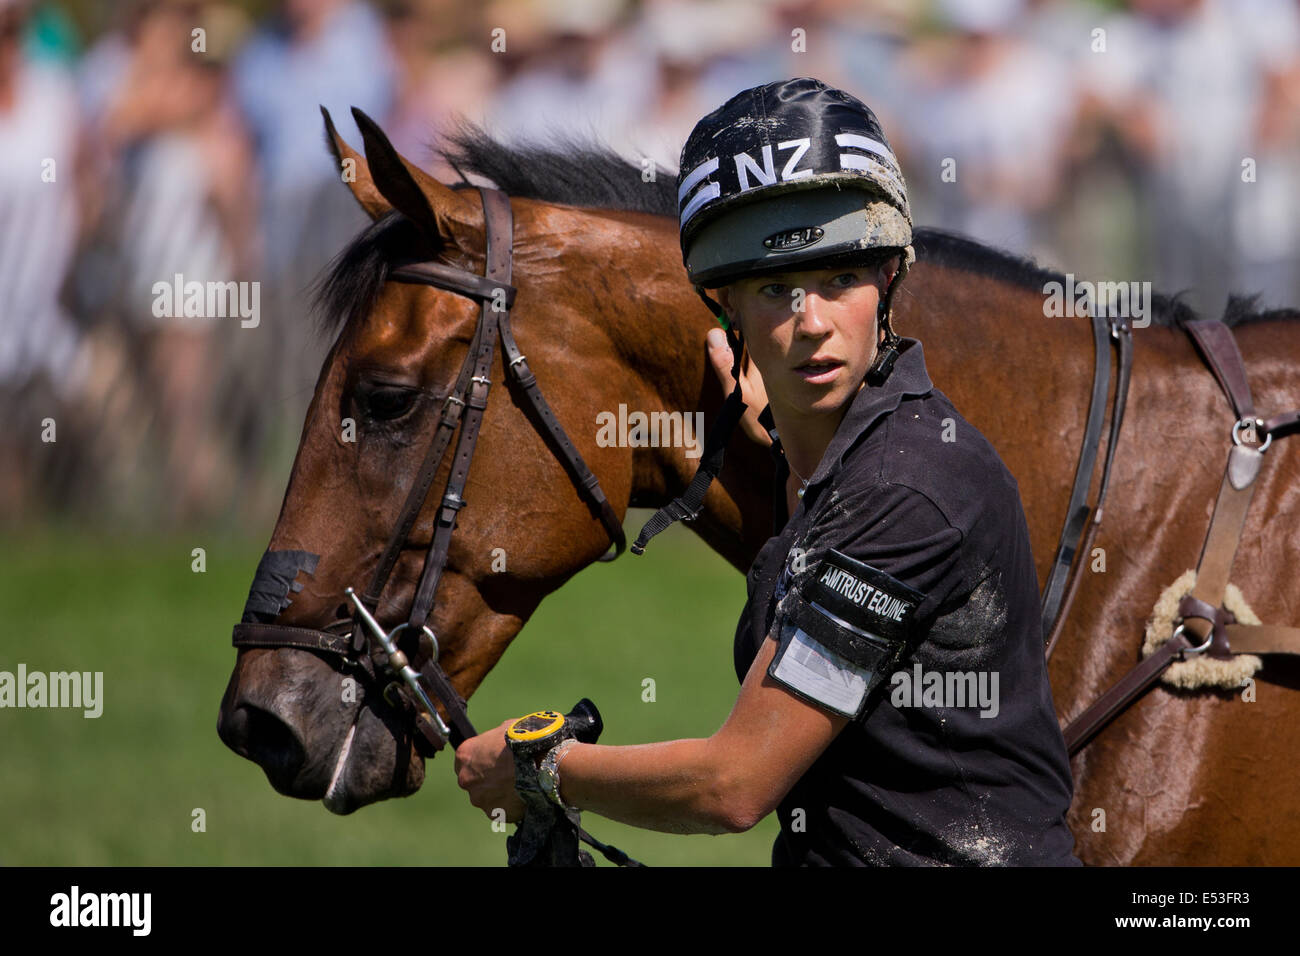 Aachen, Germany. 19th July, 2014. New Zealand rider Lucy Jackson pets her horse Willy Do after her fall during the cross-country discipline of the eventing event of the CHIO in Aachen, Germany, 19 July 2014. Photo: ROLF VENNENBERND/DPA/Alamy Live News Stock Photo